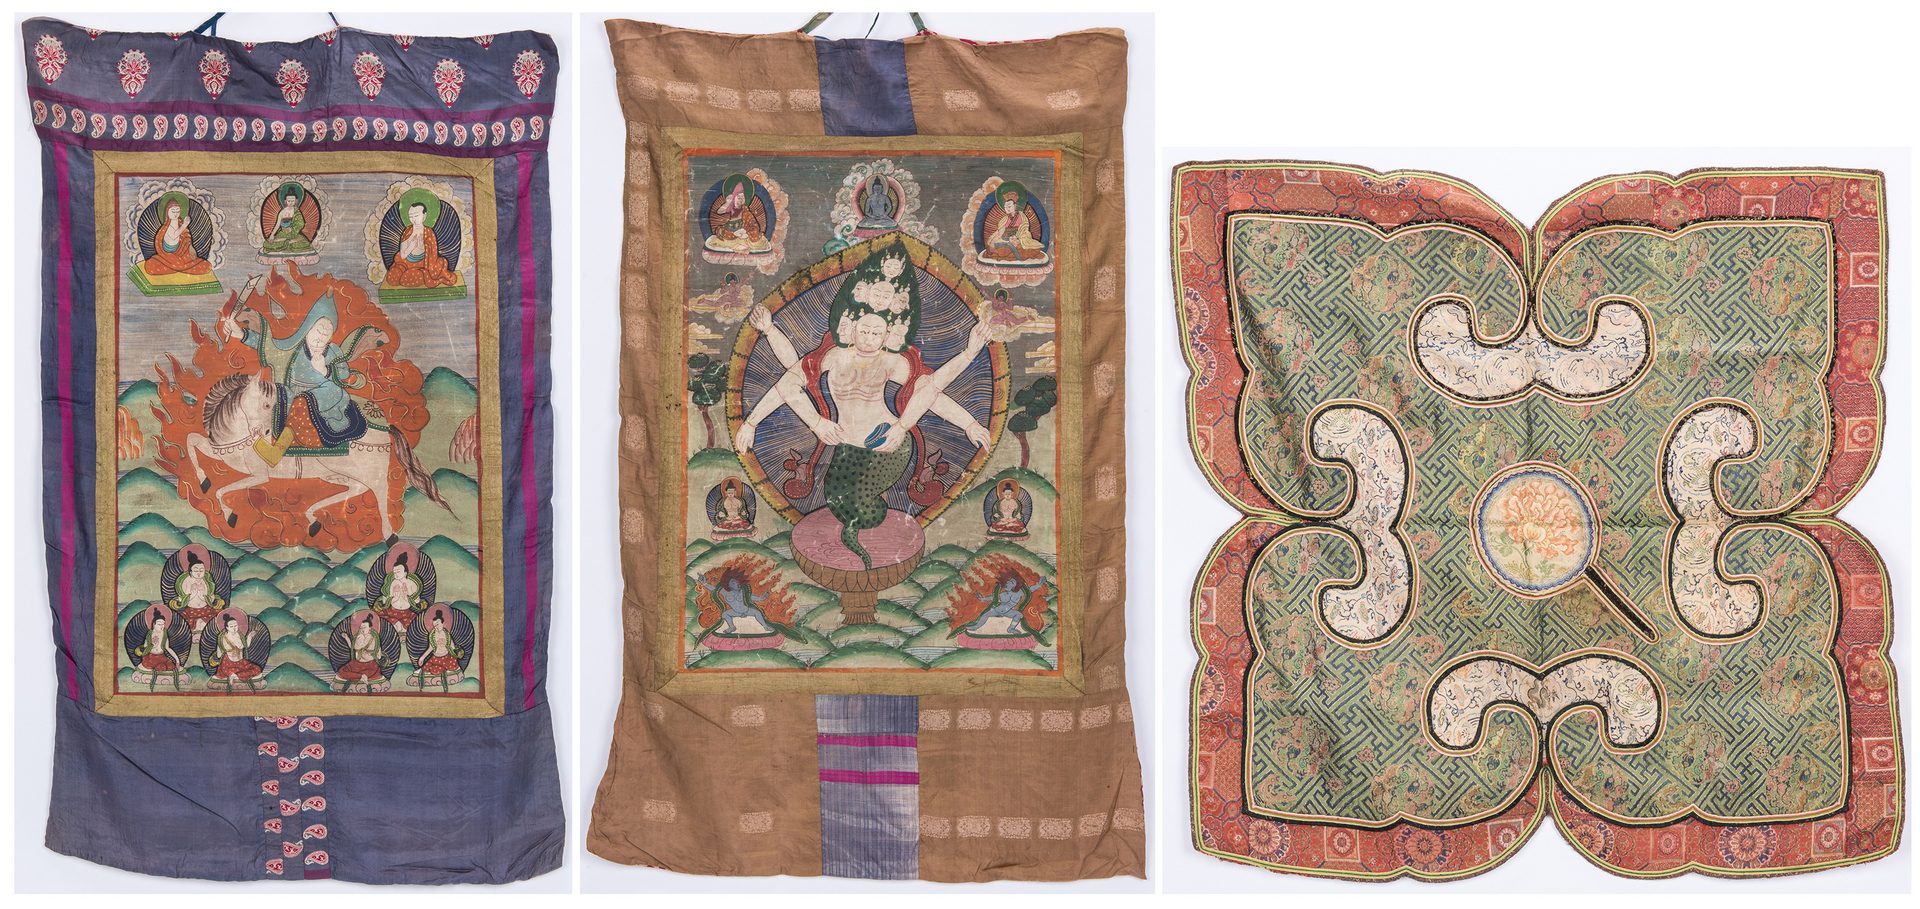 Lot 23: 2 Thangkas and 1 Chinese Embroidery, 3 items